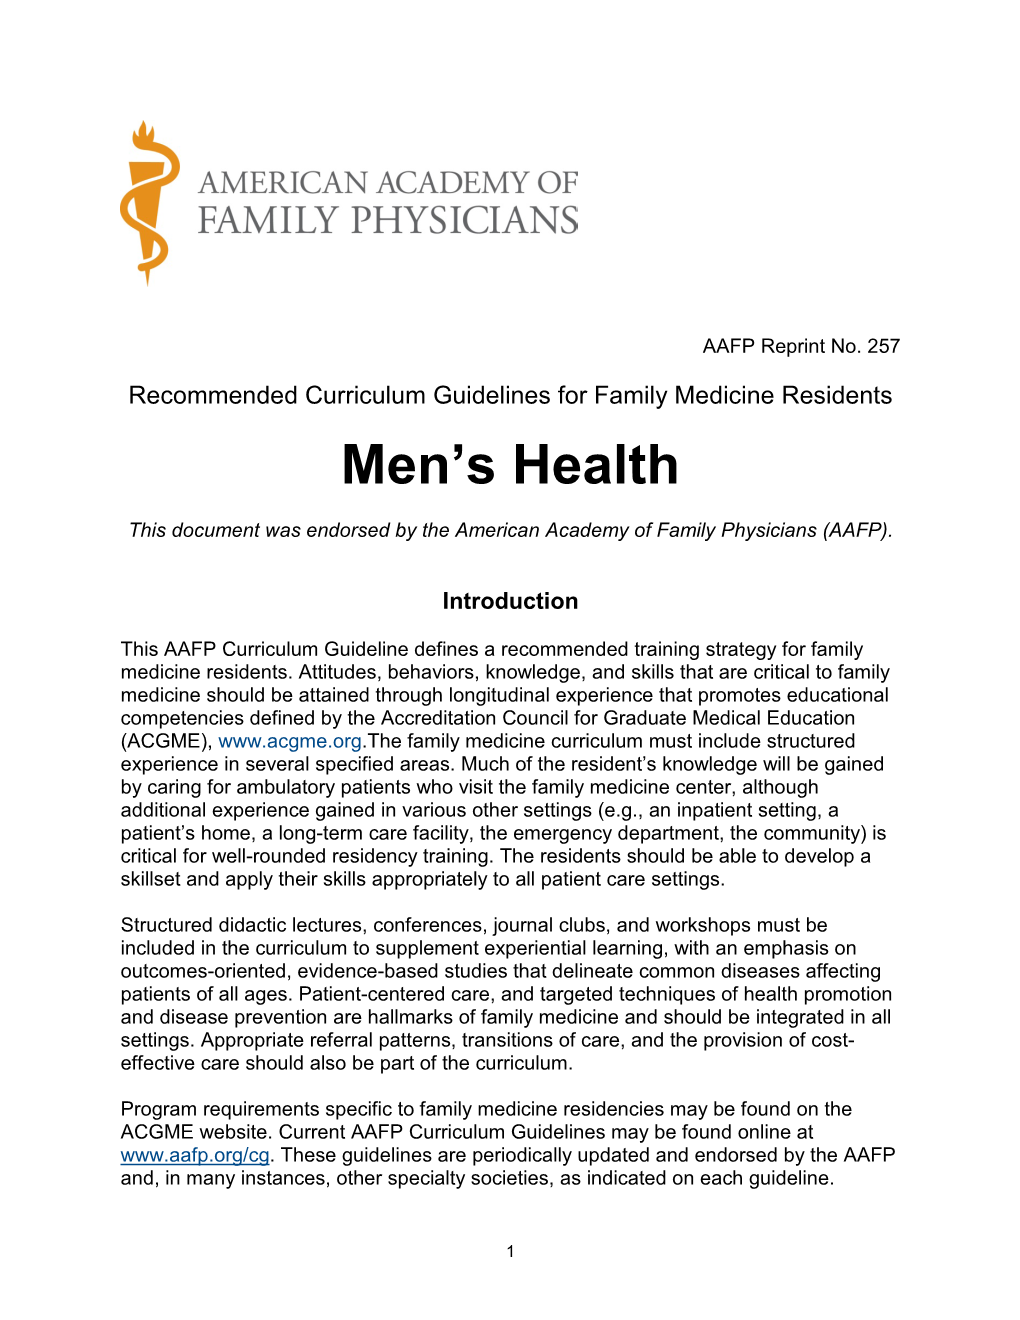 Recommended Curriculum Guidelines for Family Medicine Residents Men's Health